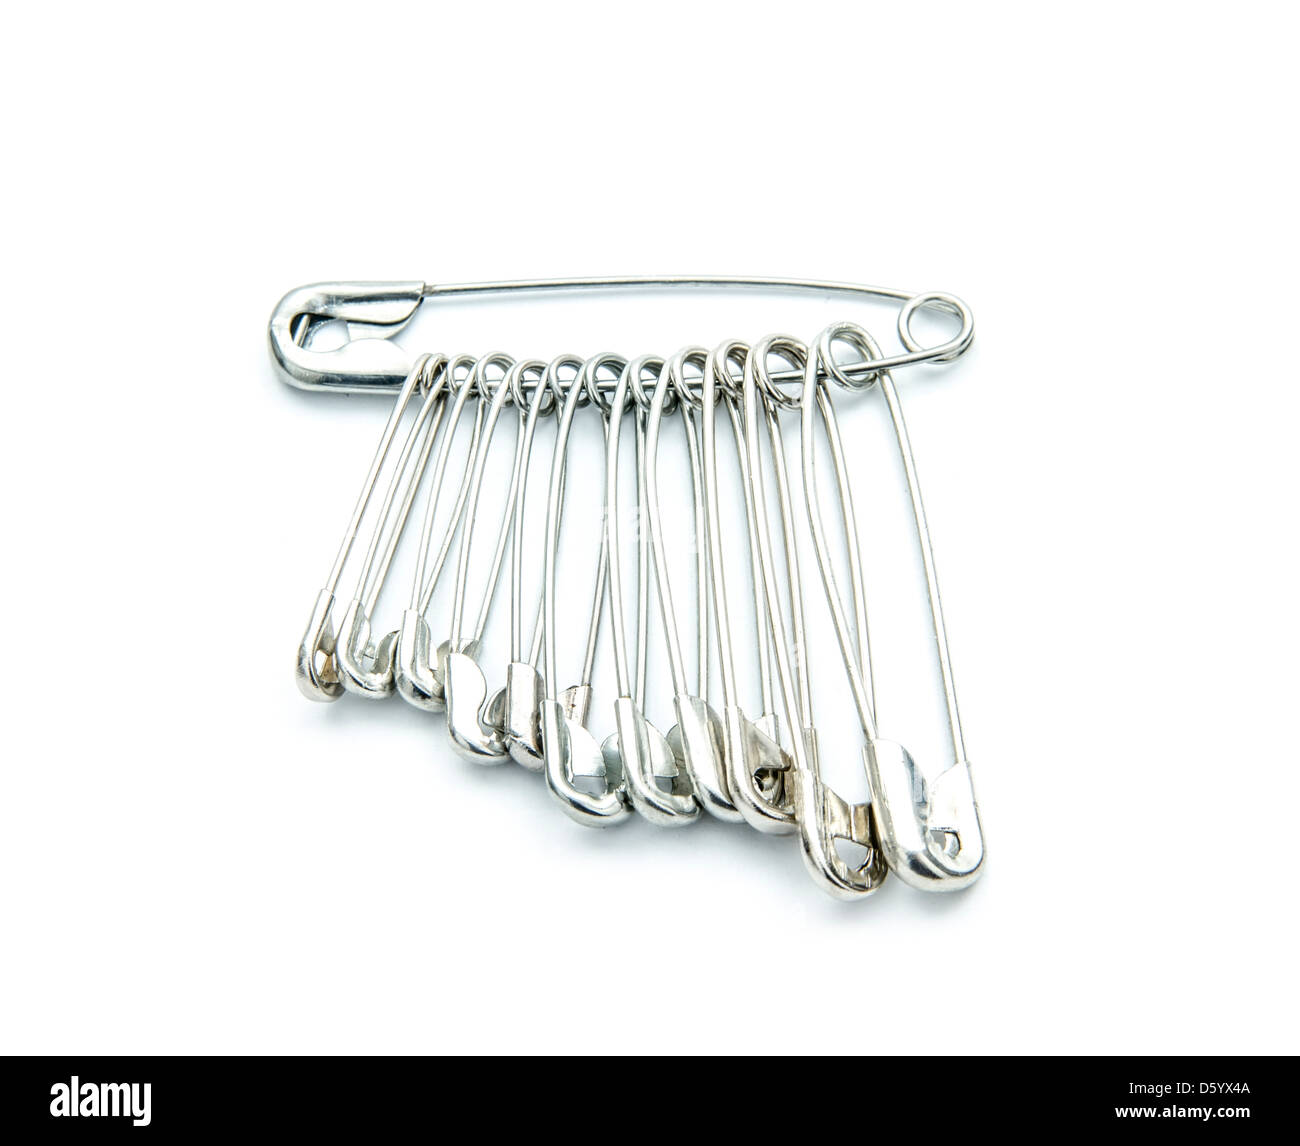 Seven colorful sewing pins on a white background, Stock image